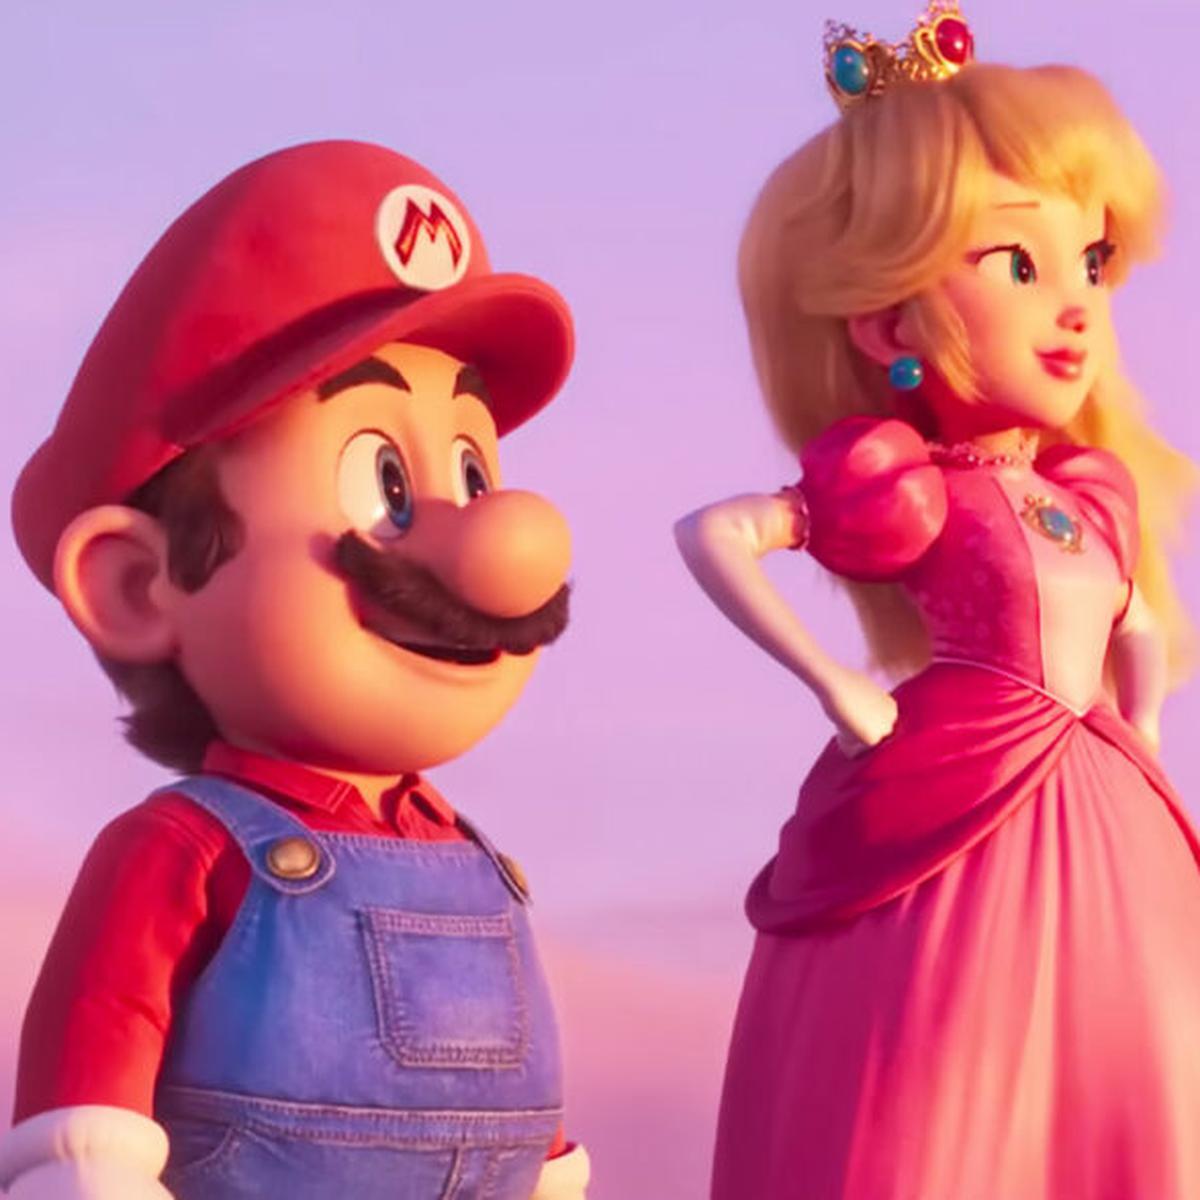 Nintendo is developing a live-action film based on its hit video